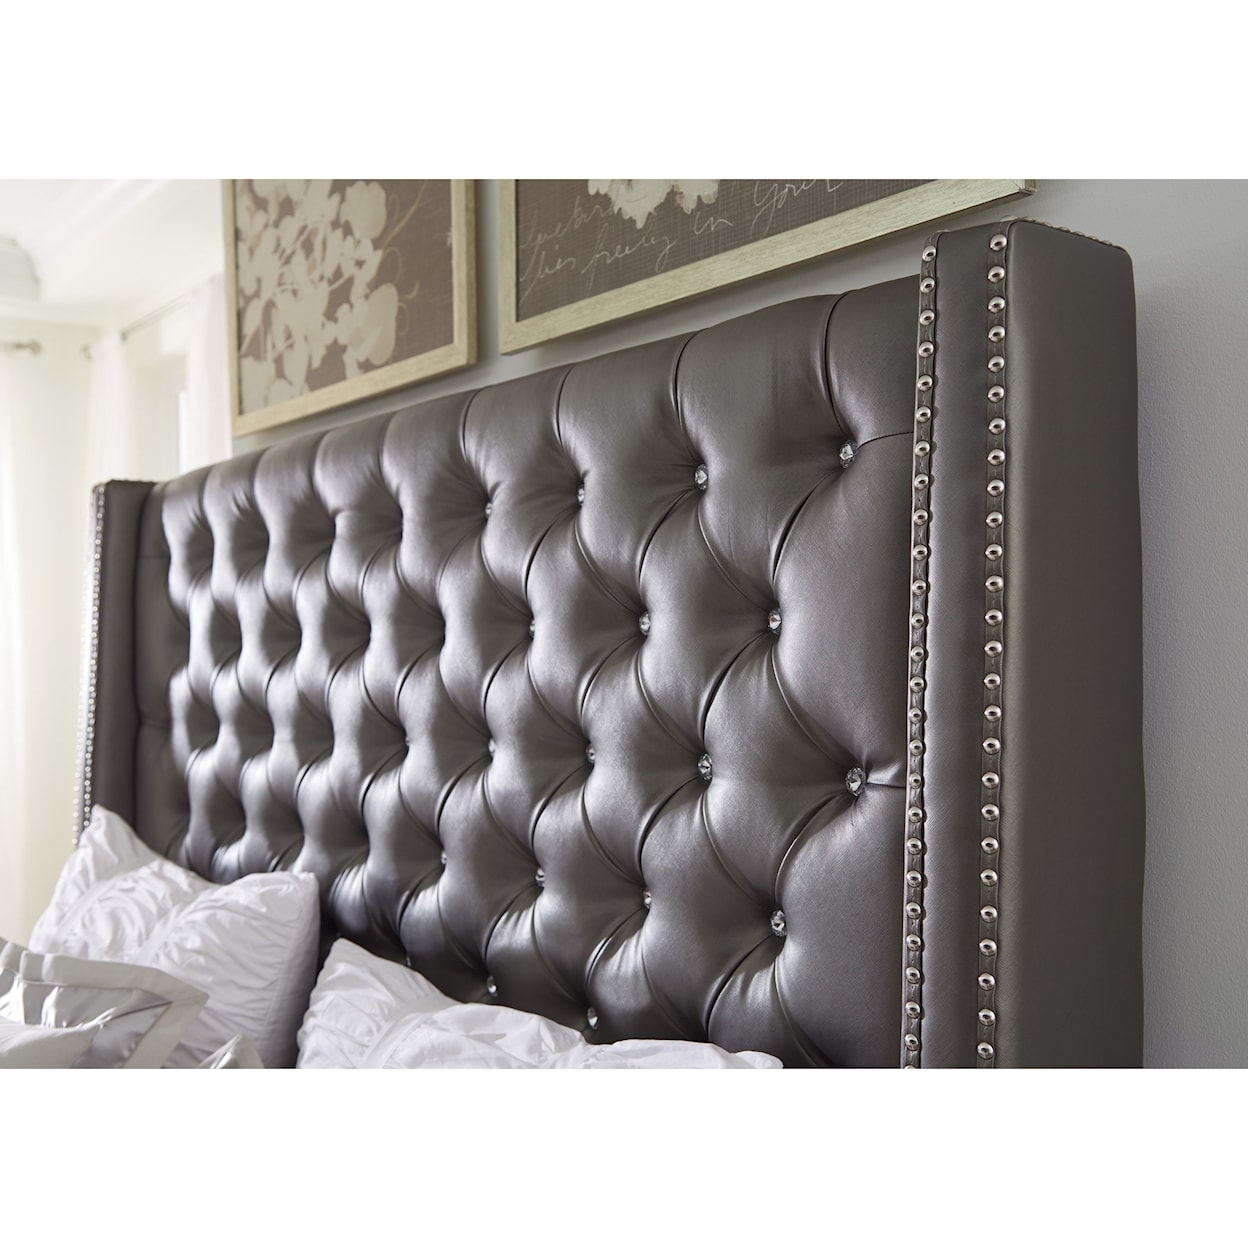 Signature Design by Ashley Furniture Coralayne Queen Upholstered Bed